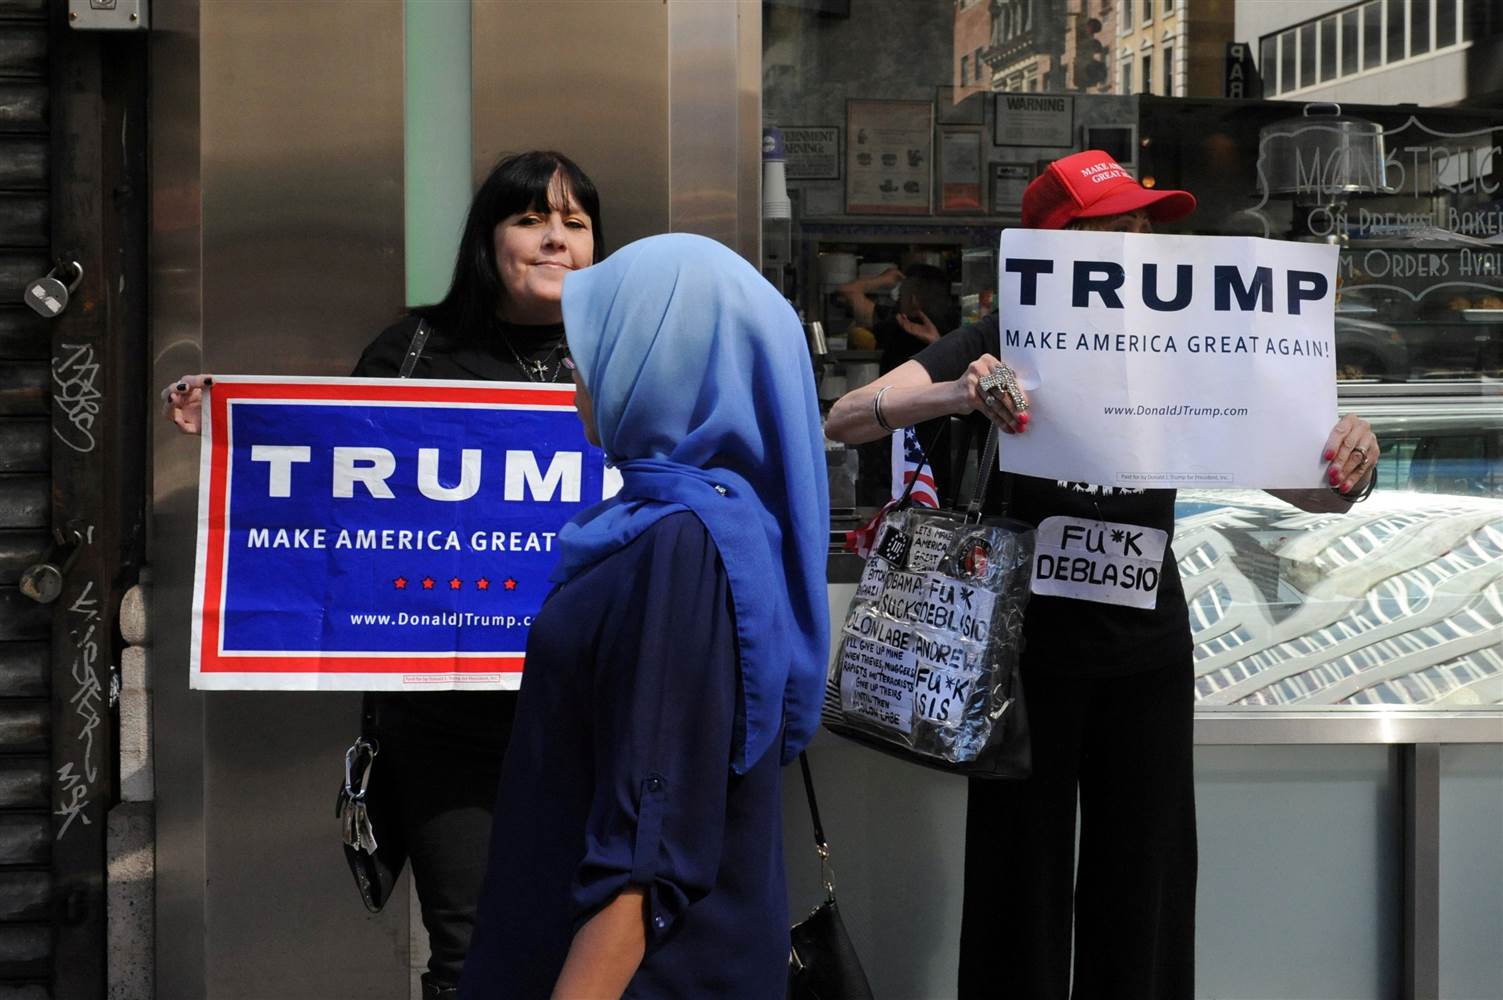 image a woman wearing a muslim headscarf walks past people holding donald trump signs photo reuters